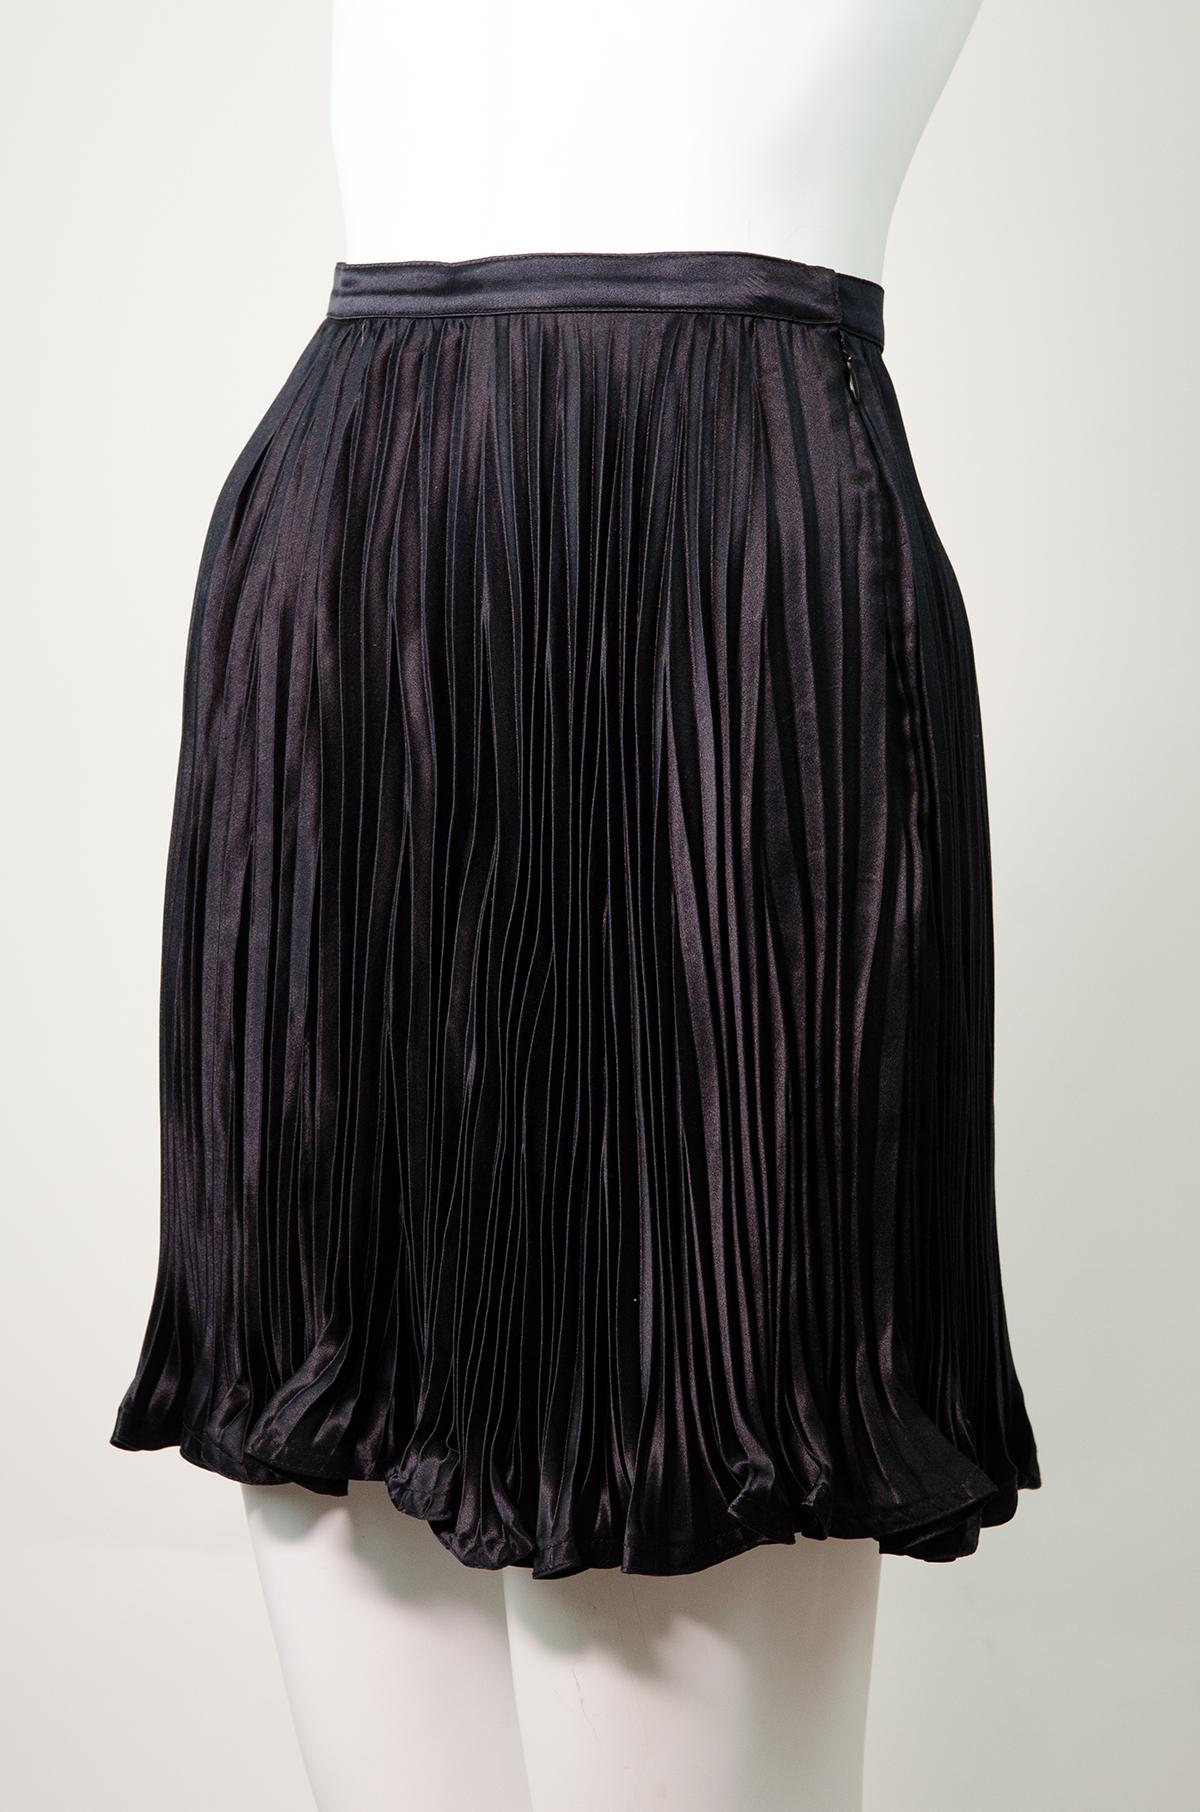 VERSACE Vintage S/S 1995 Runway Pleated Silk Mini Skirt

Brand: Versace

Designer: Gianni Versace

Collection / Year: Spring Summer 1995

Fabric: Silk Satin

Color: Black 

Size: IT40

Made in Italy.

So feminine! This beautiful pleated skirt is a